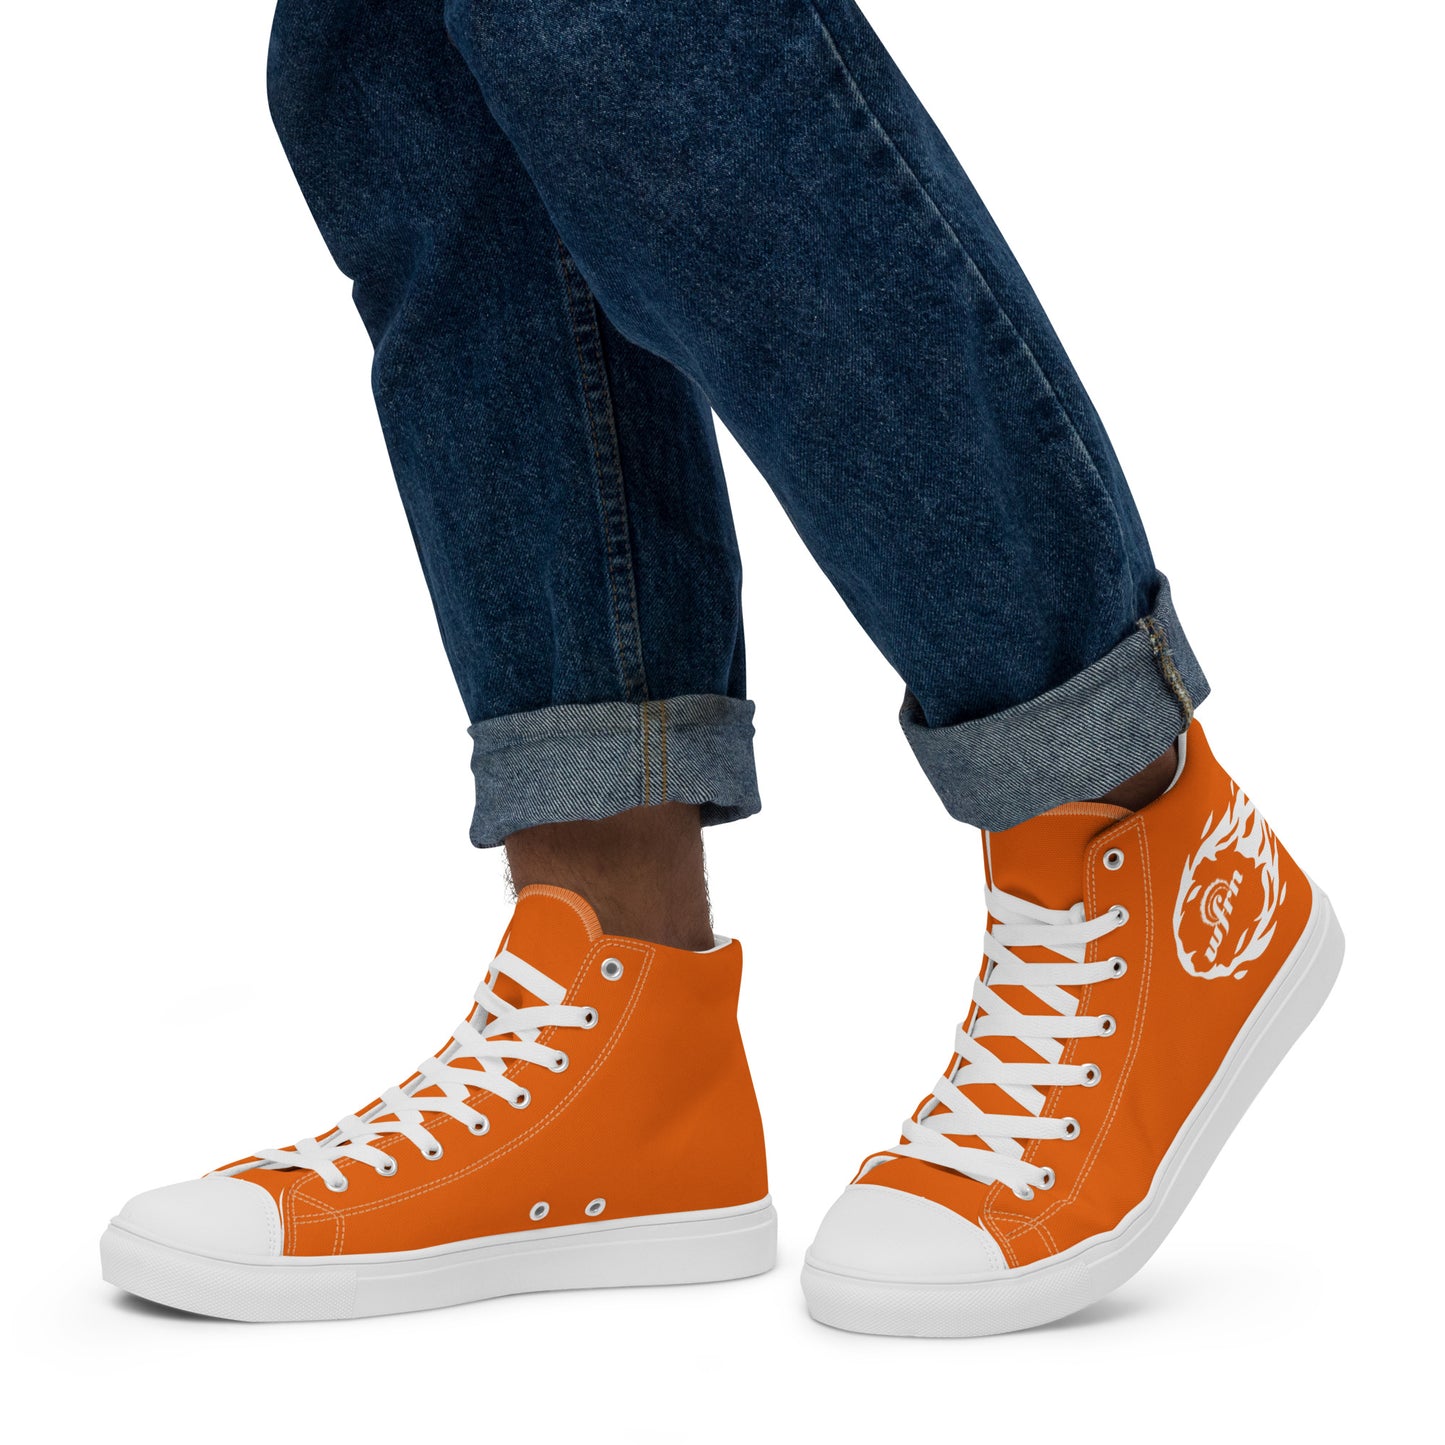 3rd Edition: Men’s high top canvas shoes